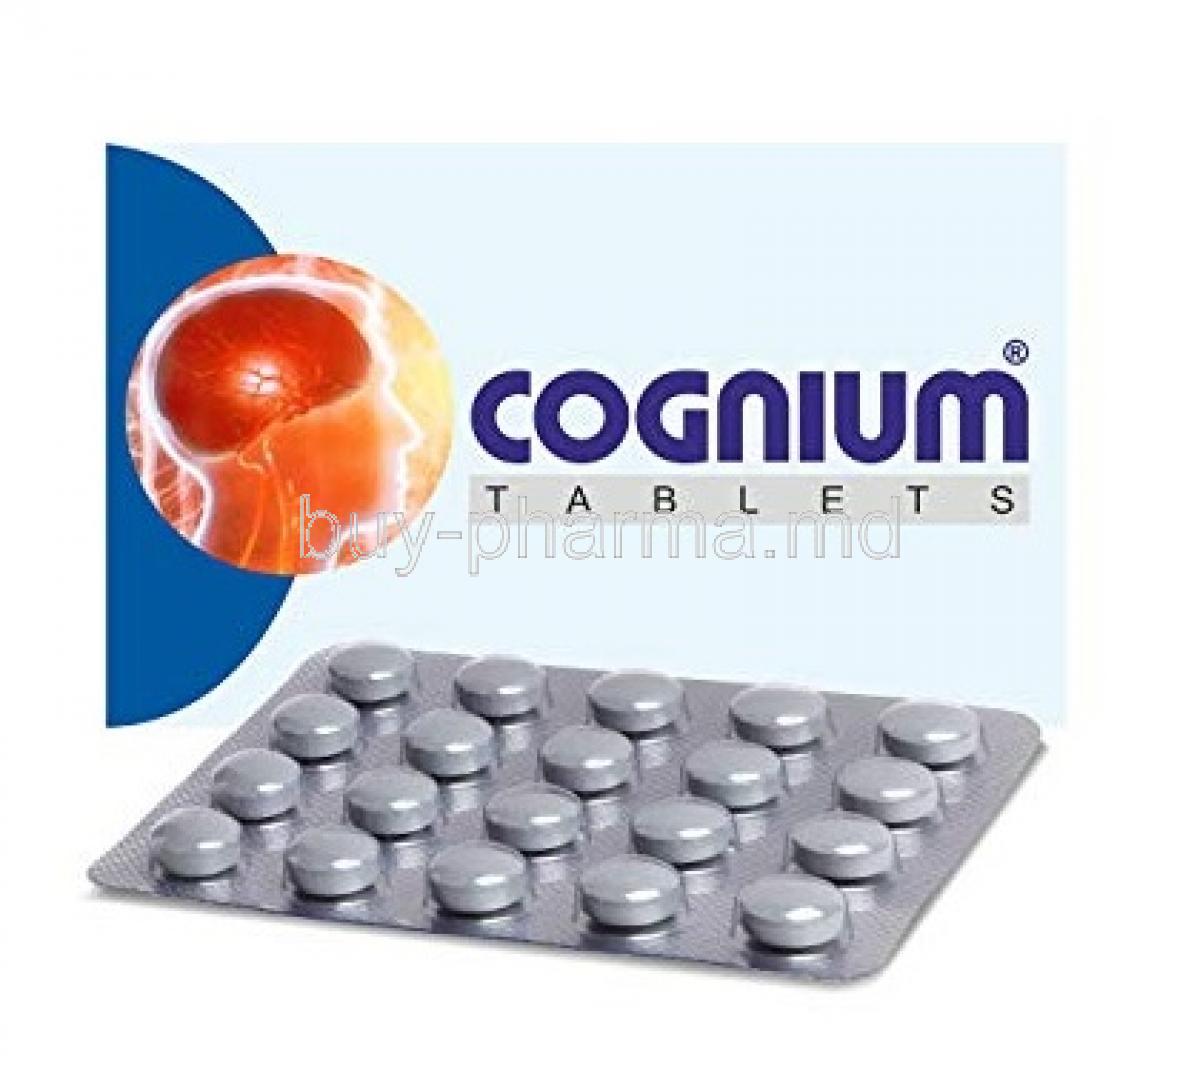 Cognium box and tablets